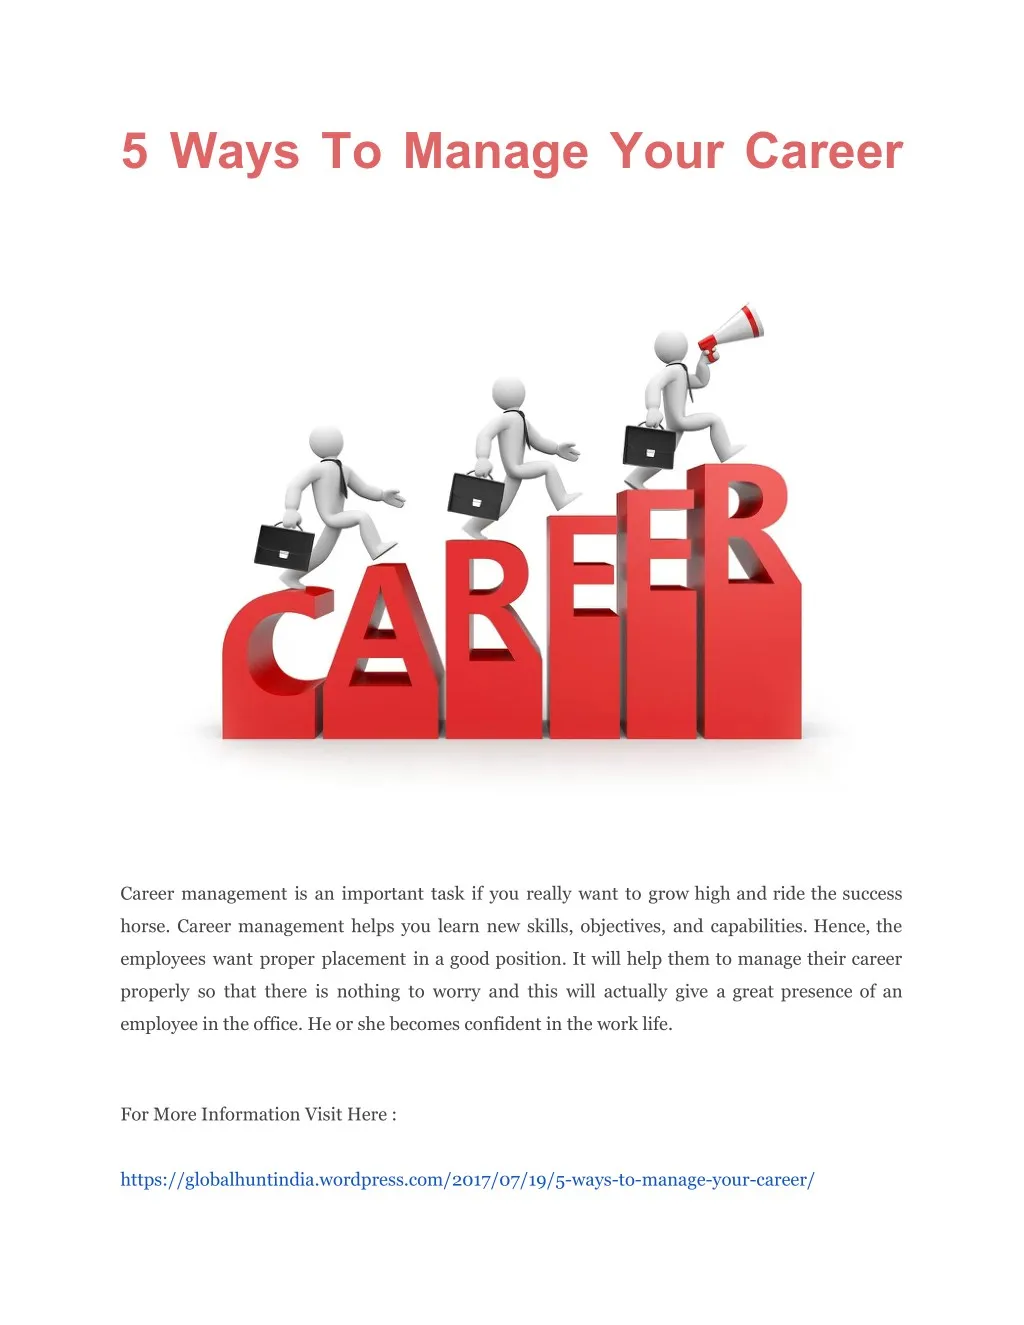 5 ways to manage your career